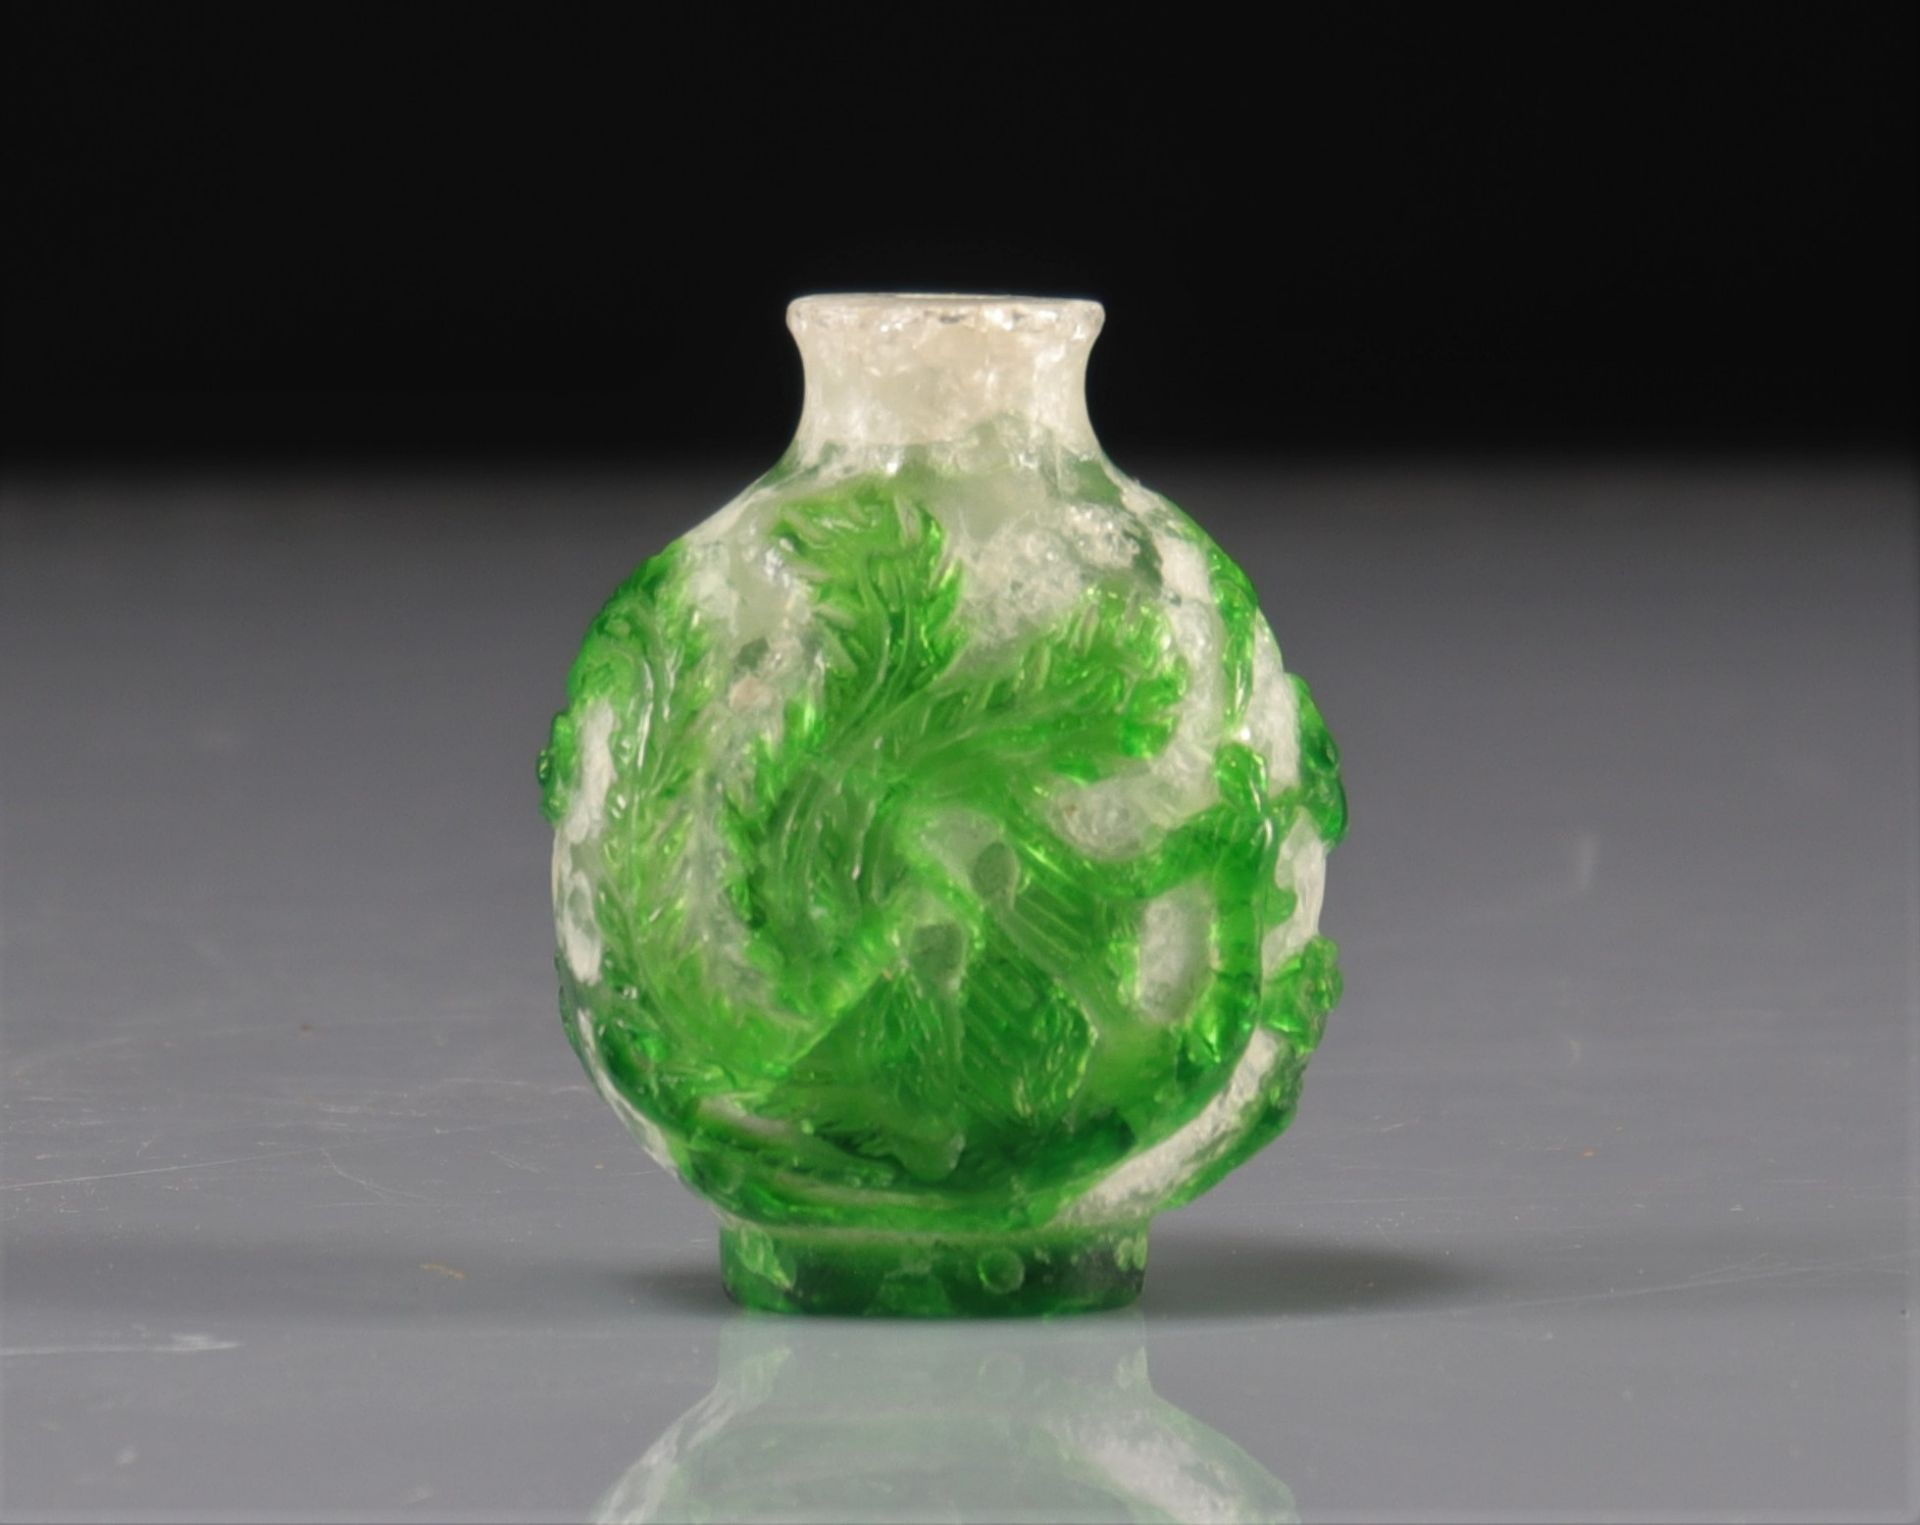 Chinese glass snuffbox - Image 2 of 2